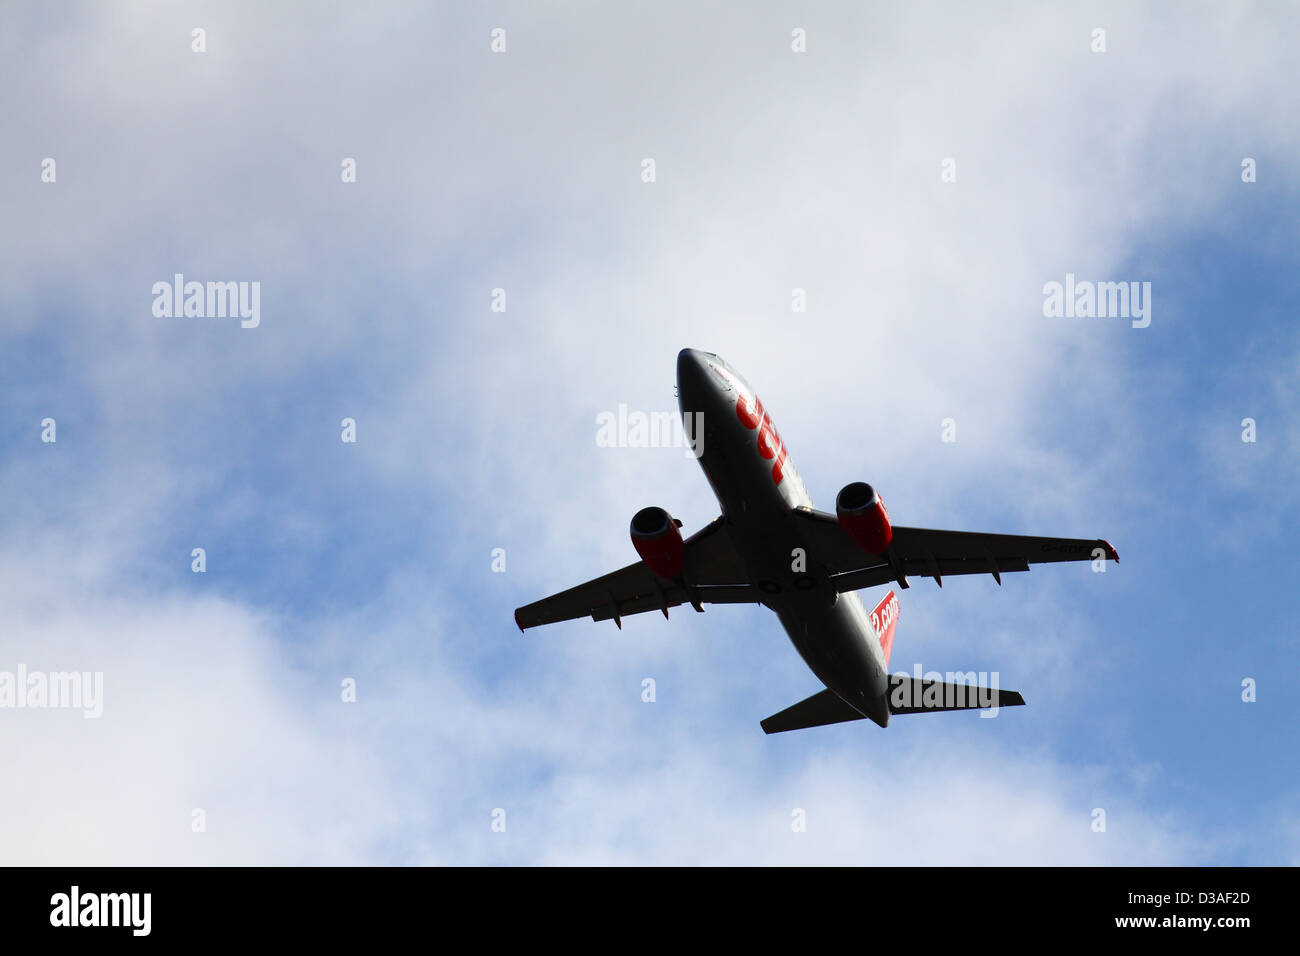 Jet2.com Boeing 737 gaining altitude shortly after takeoff at Yeadon airport Stock Photo